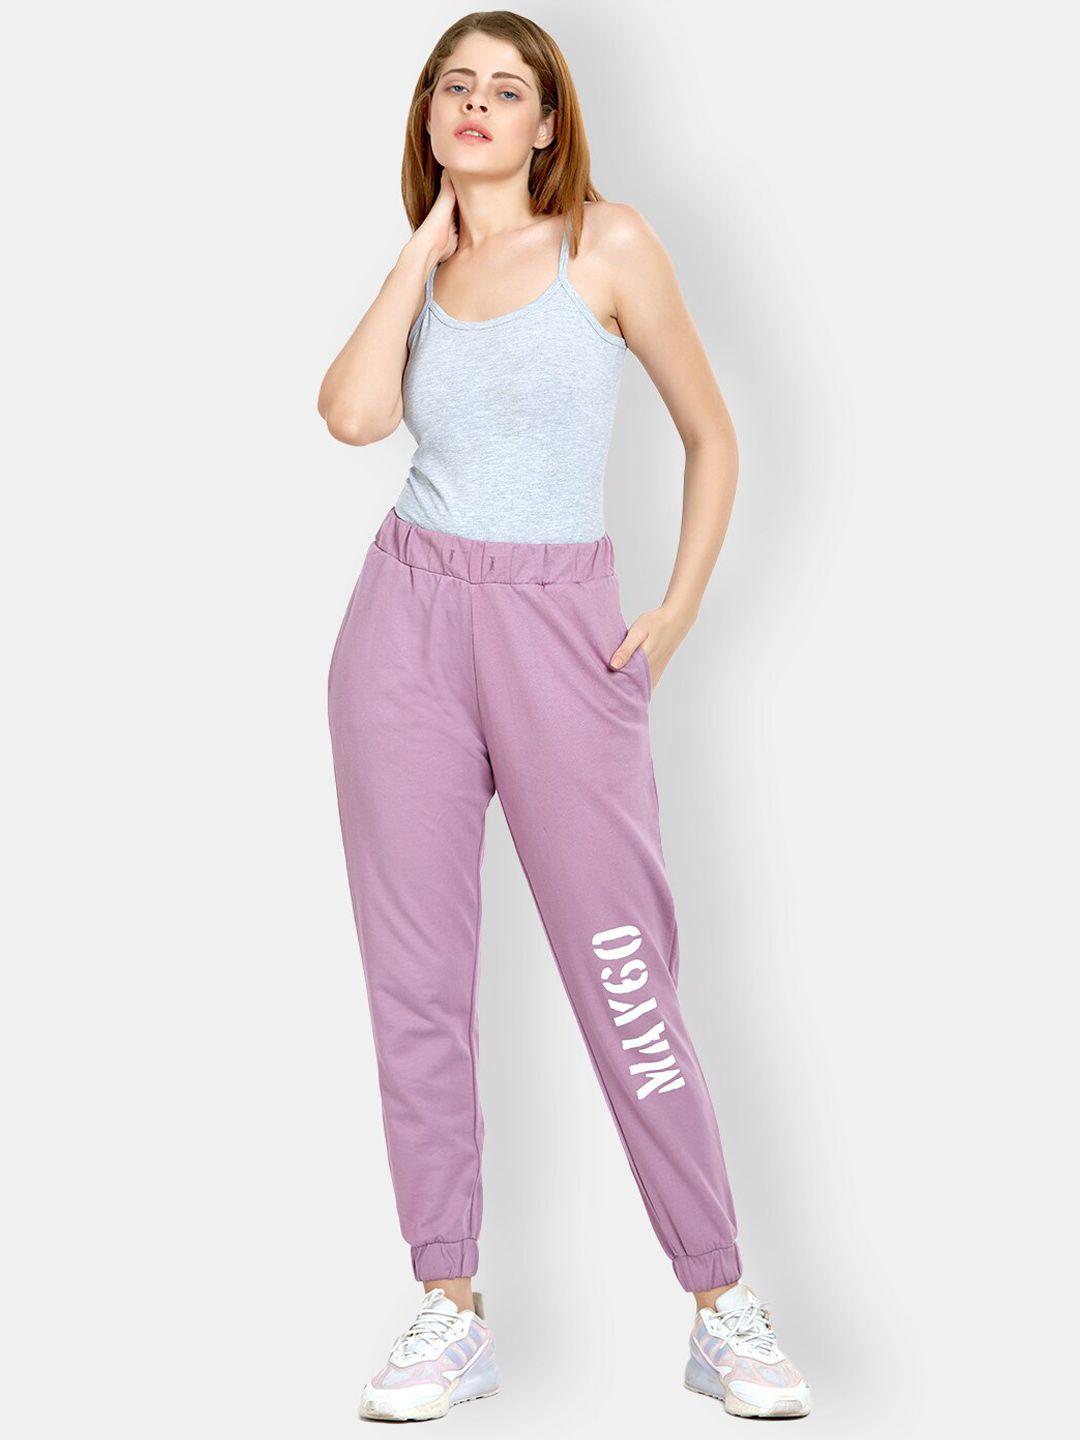 maysixty women mid-rise brand logo printed cotton joggers